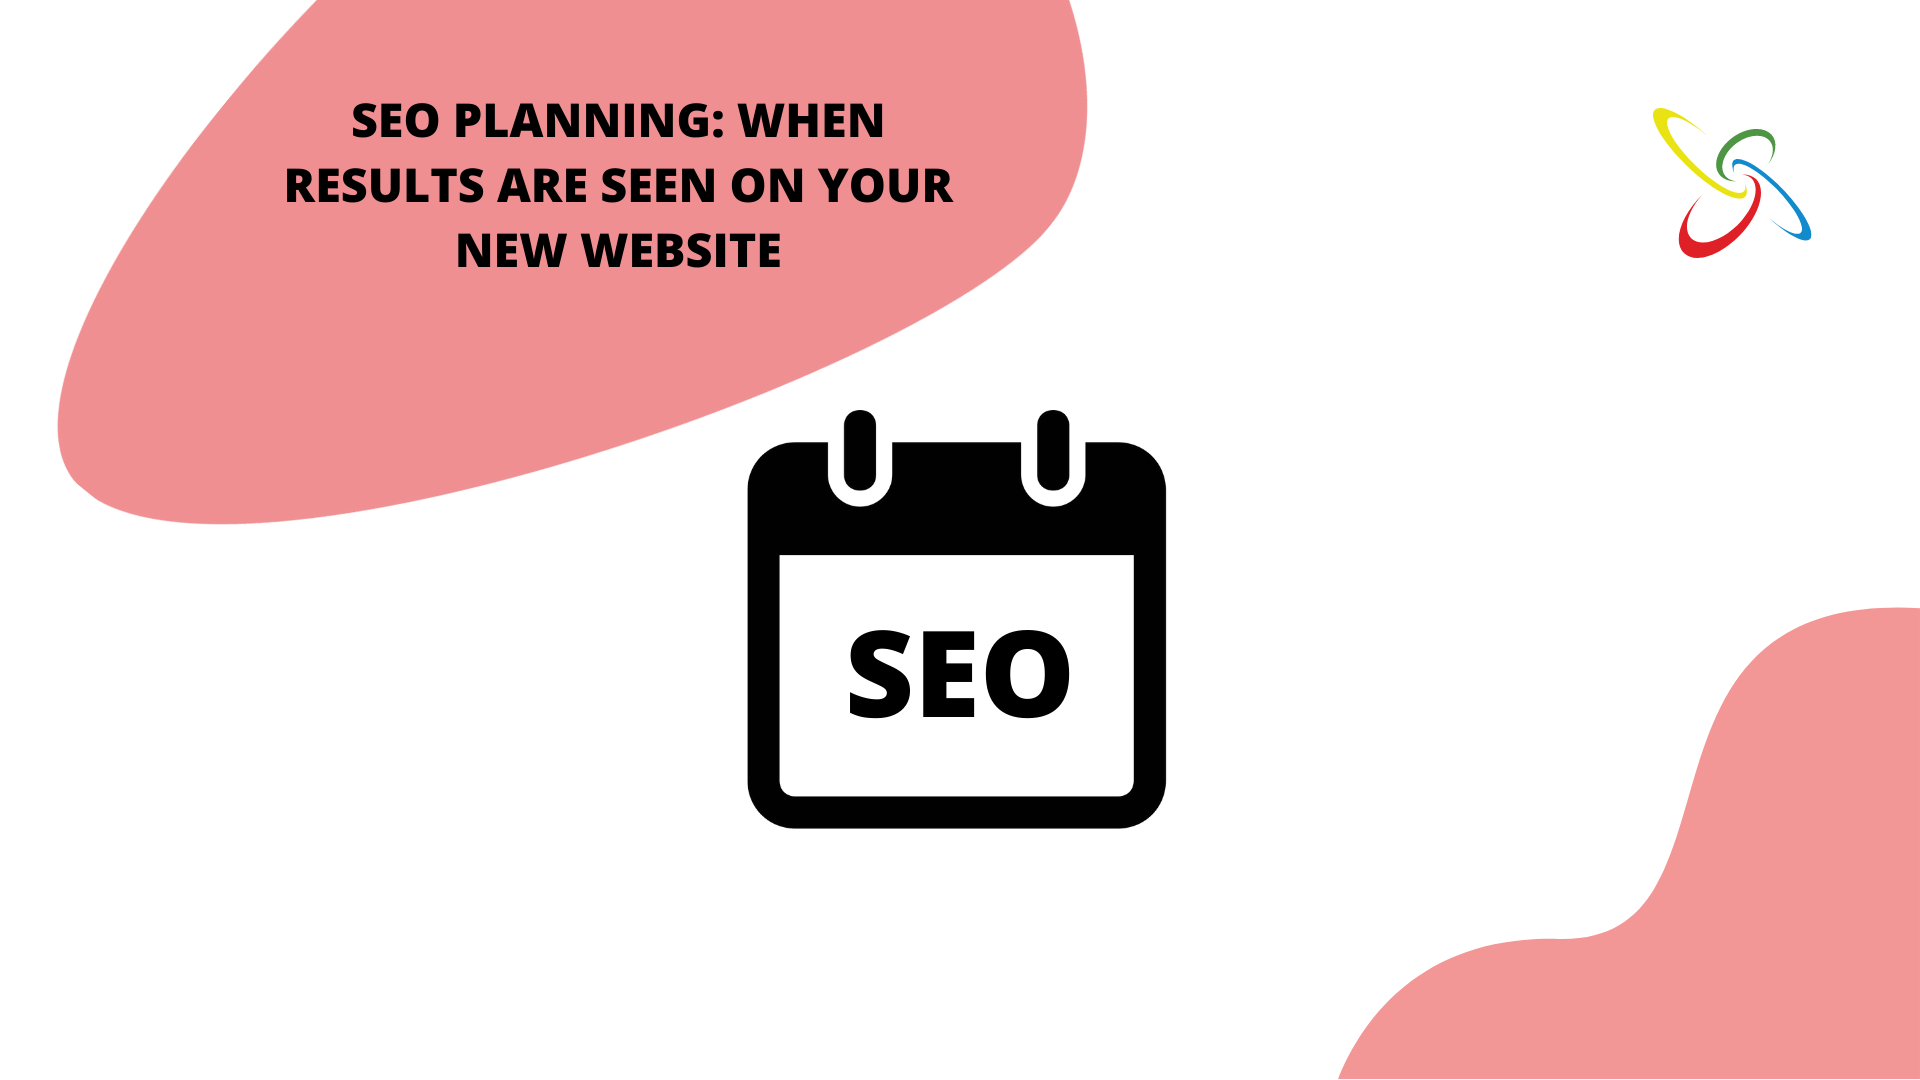 SEO Planning: When Results Are Seen